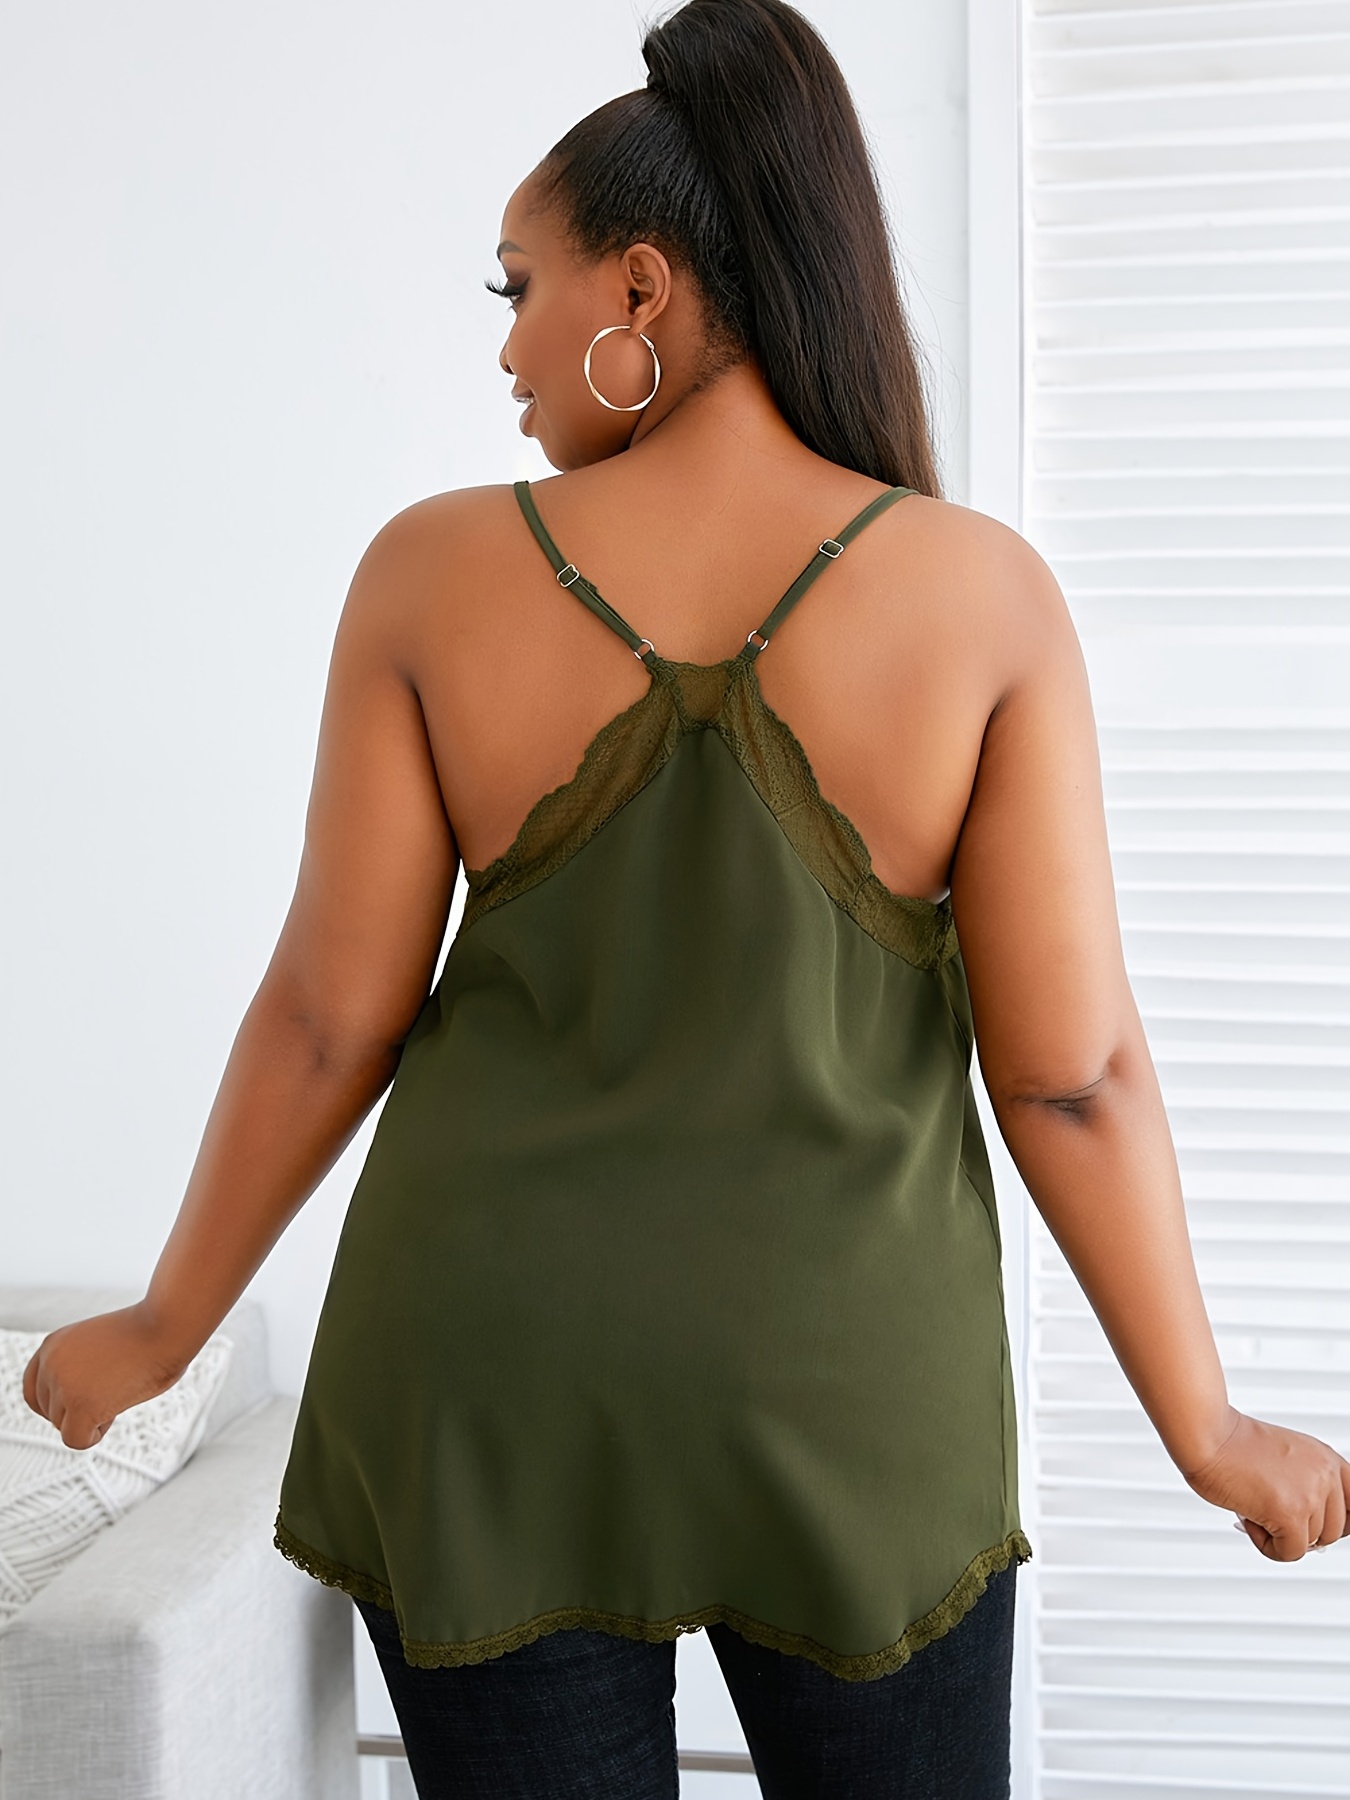 Women Plus Size Tank Tops Sleeveless V Neck Casual Loose Stretchy Comfort  Blouse